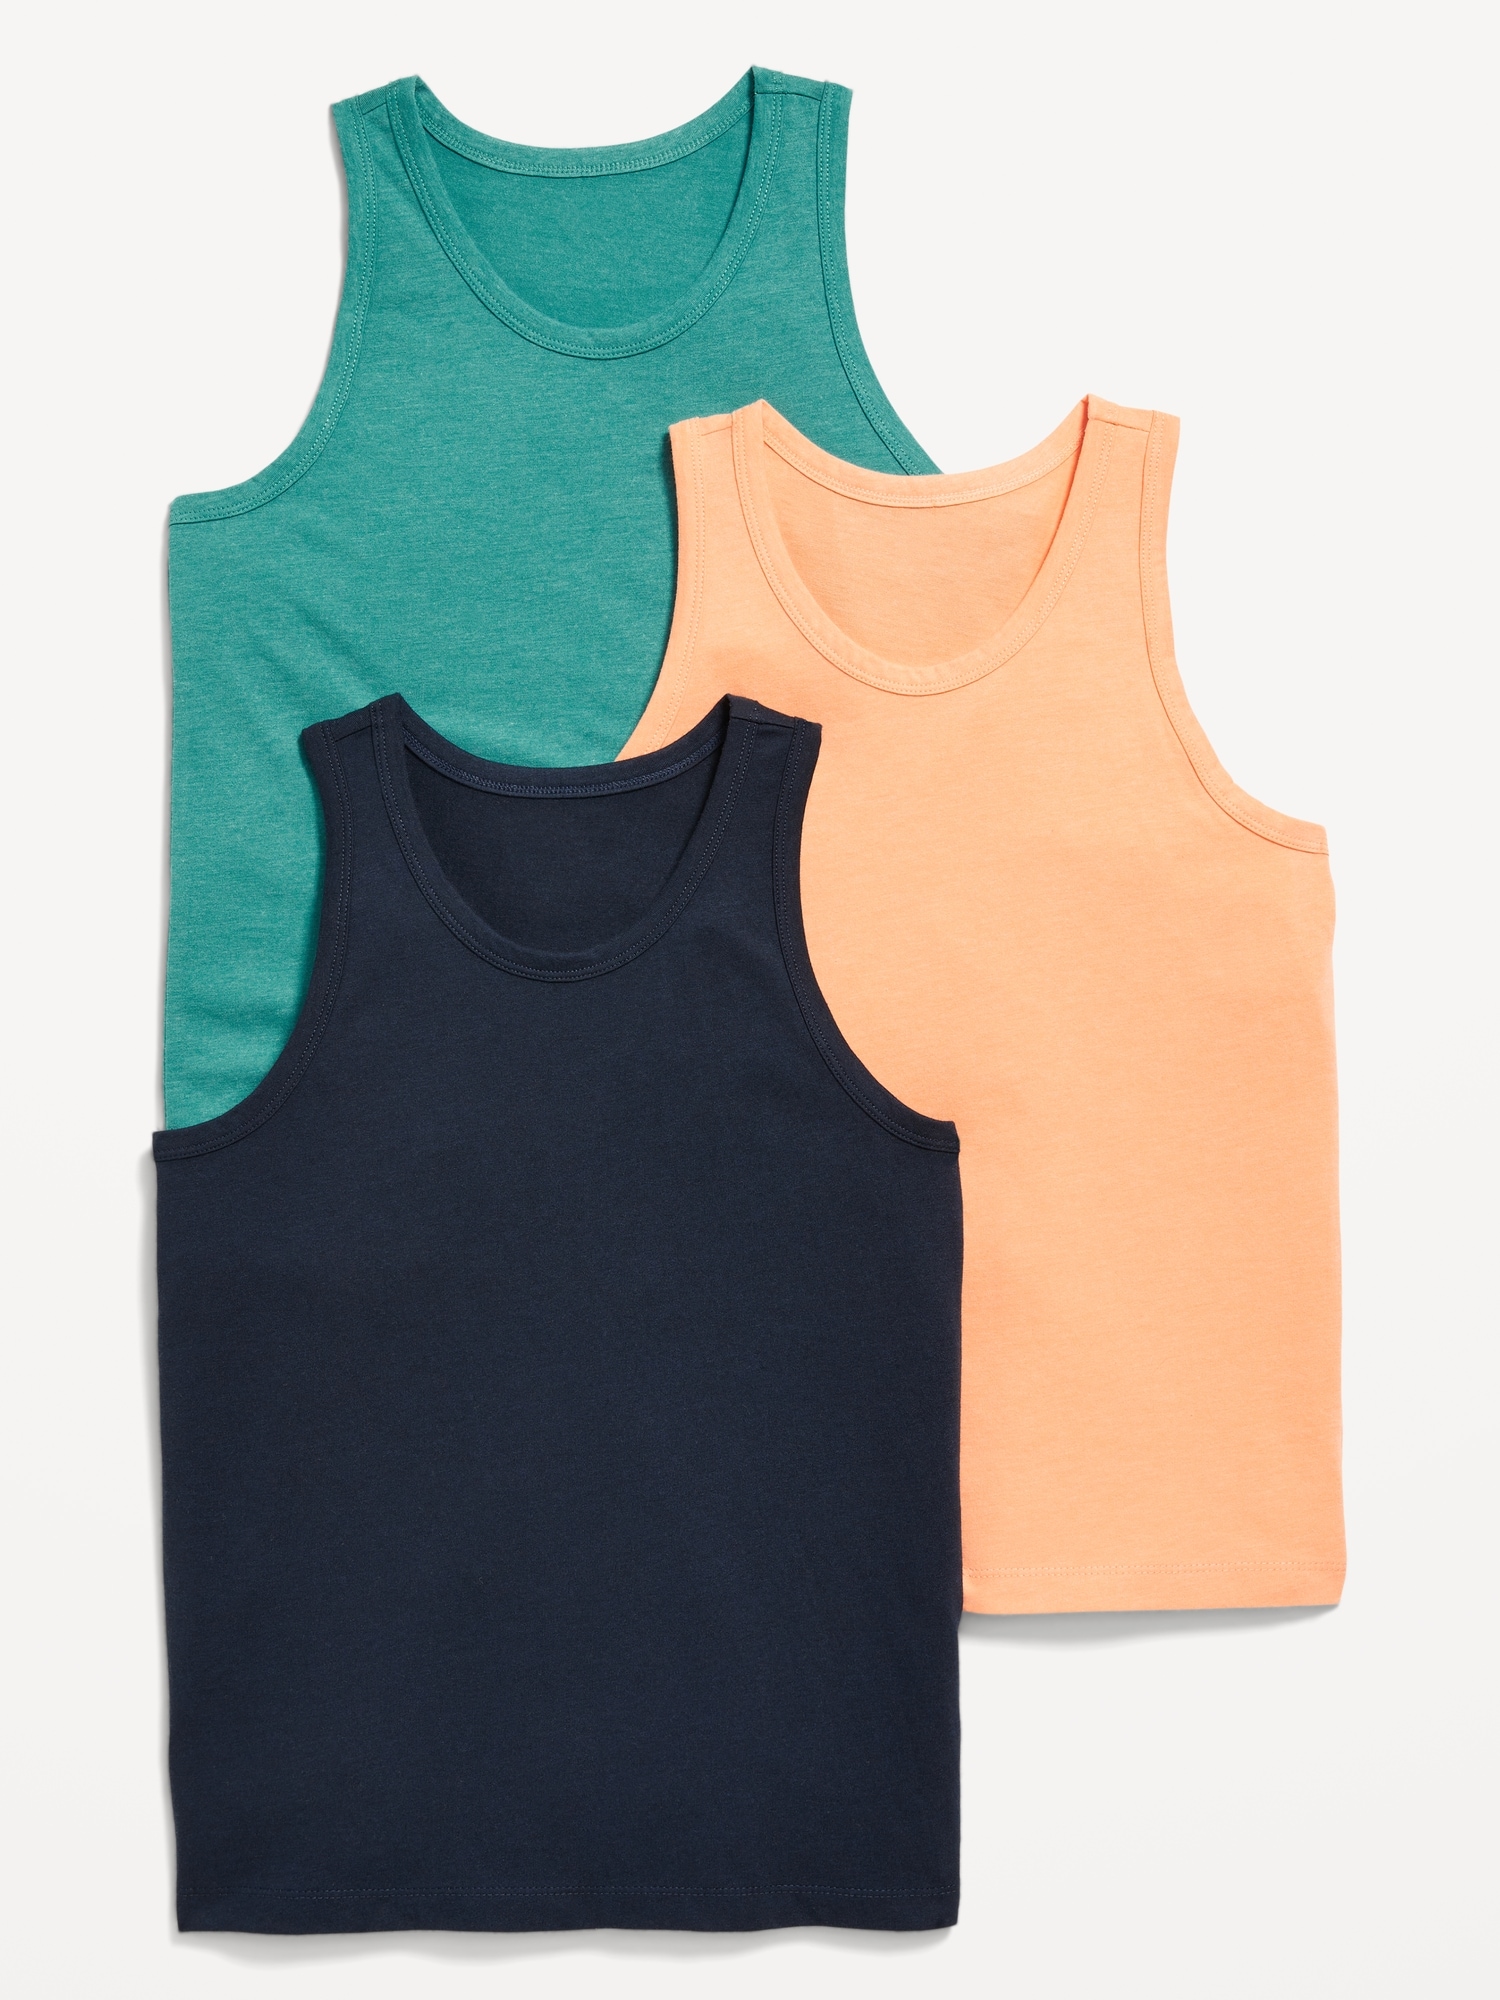 Men's Sale Shirts, Up to 40% Off – Tagged tanks